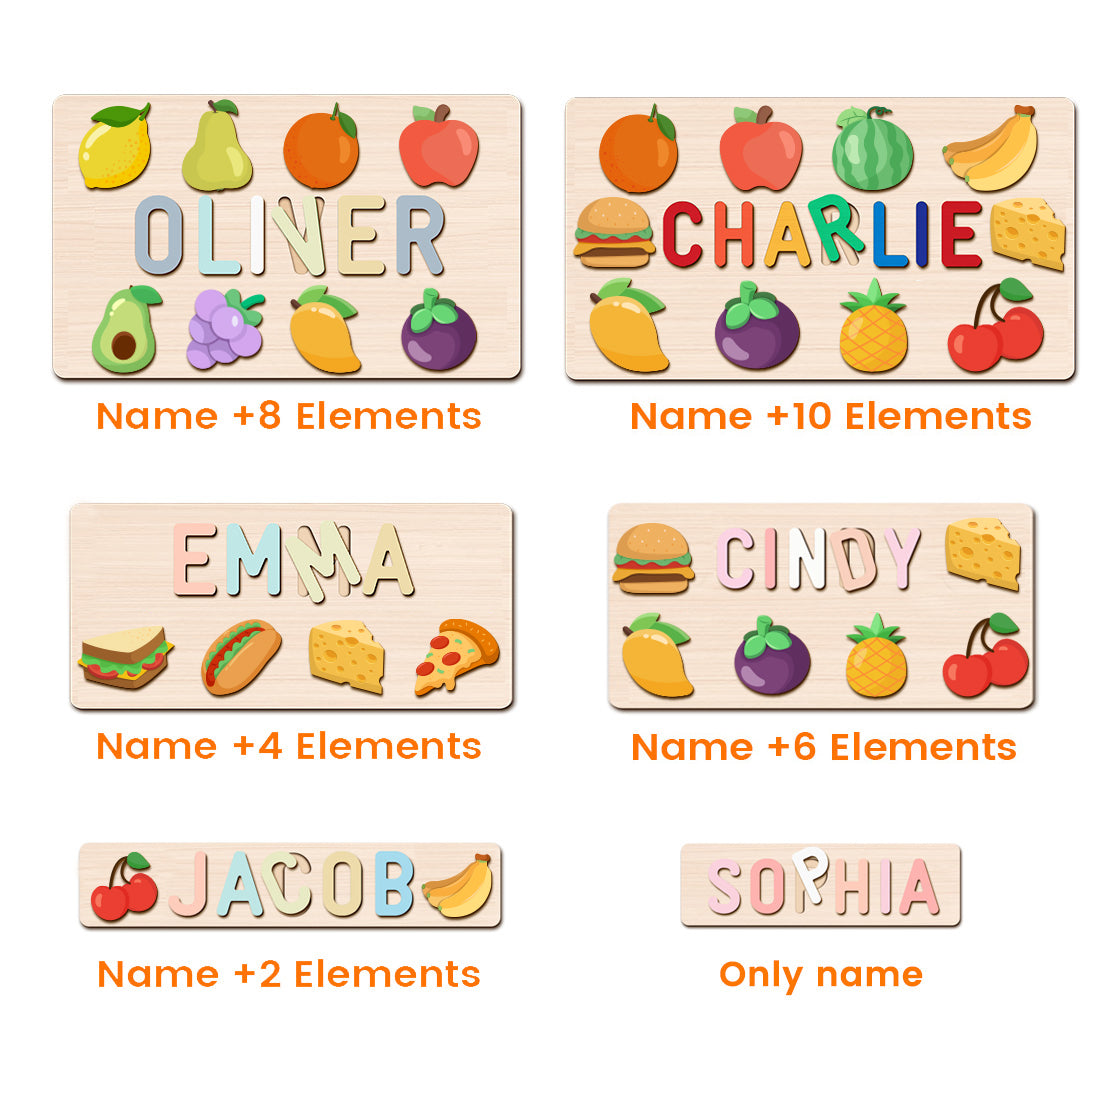 Personalized Wooden Baby Name Puzzle with Food Product Name: Personalized Wooden Baby Name Puzzle with Food Material: Eco-Friendly Plywood BasswoodLetters Available: Up to 10Engraving Messages: AvailableNon-Toxic: YesNon-Harmful: Yes Color: Pastel-boy; Pa